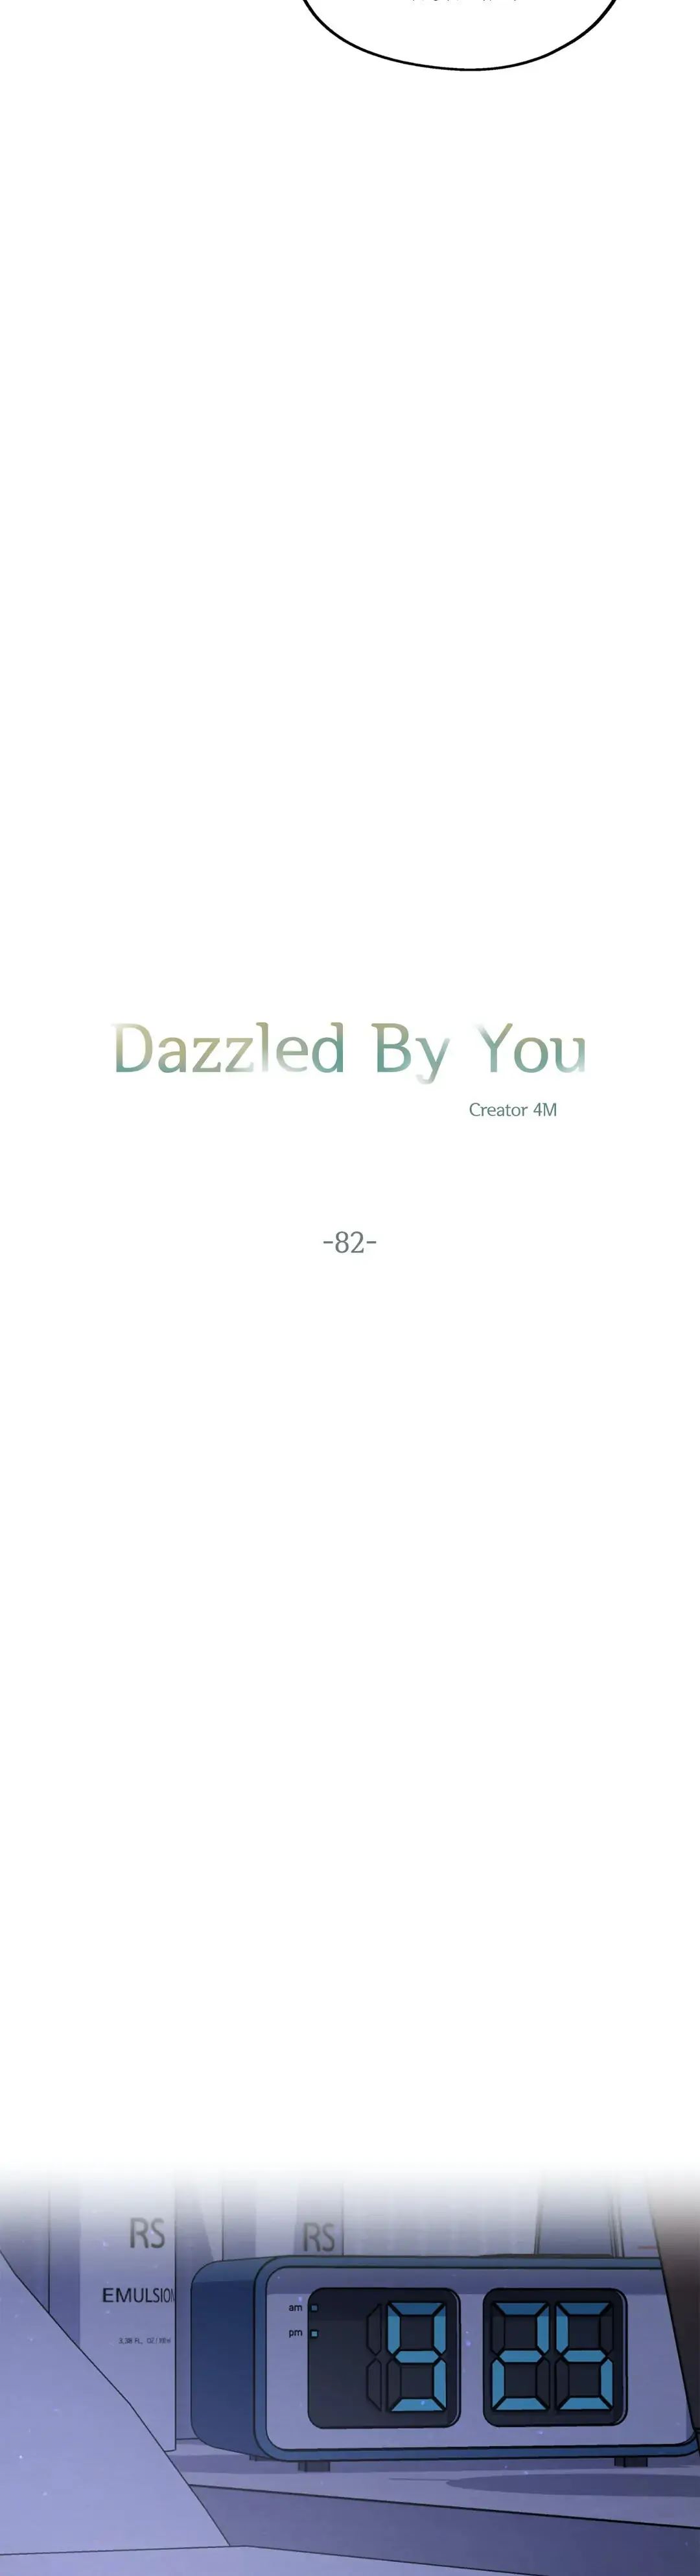 Dazzled By You image